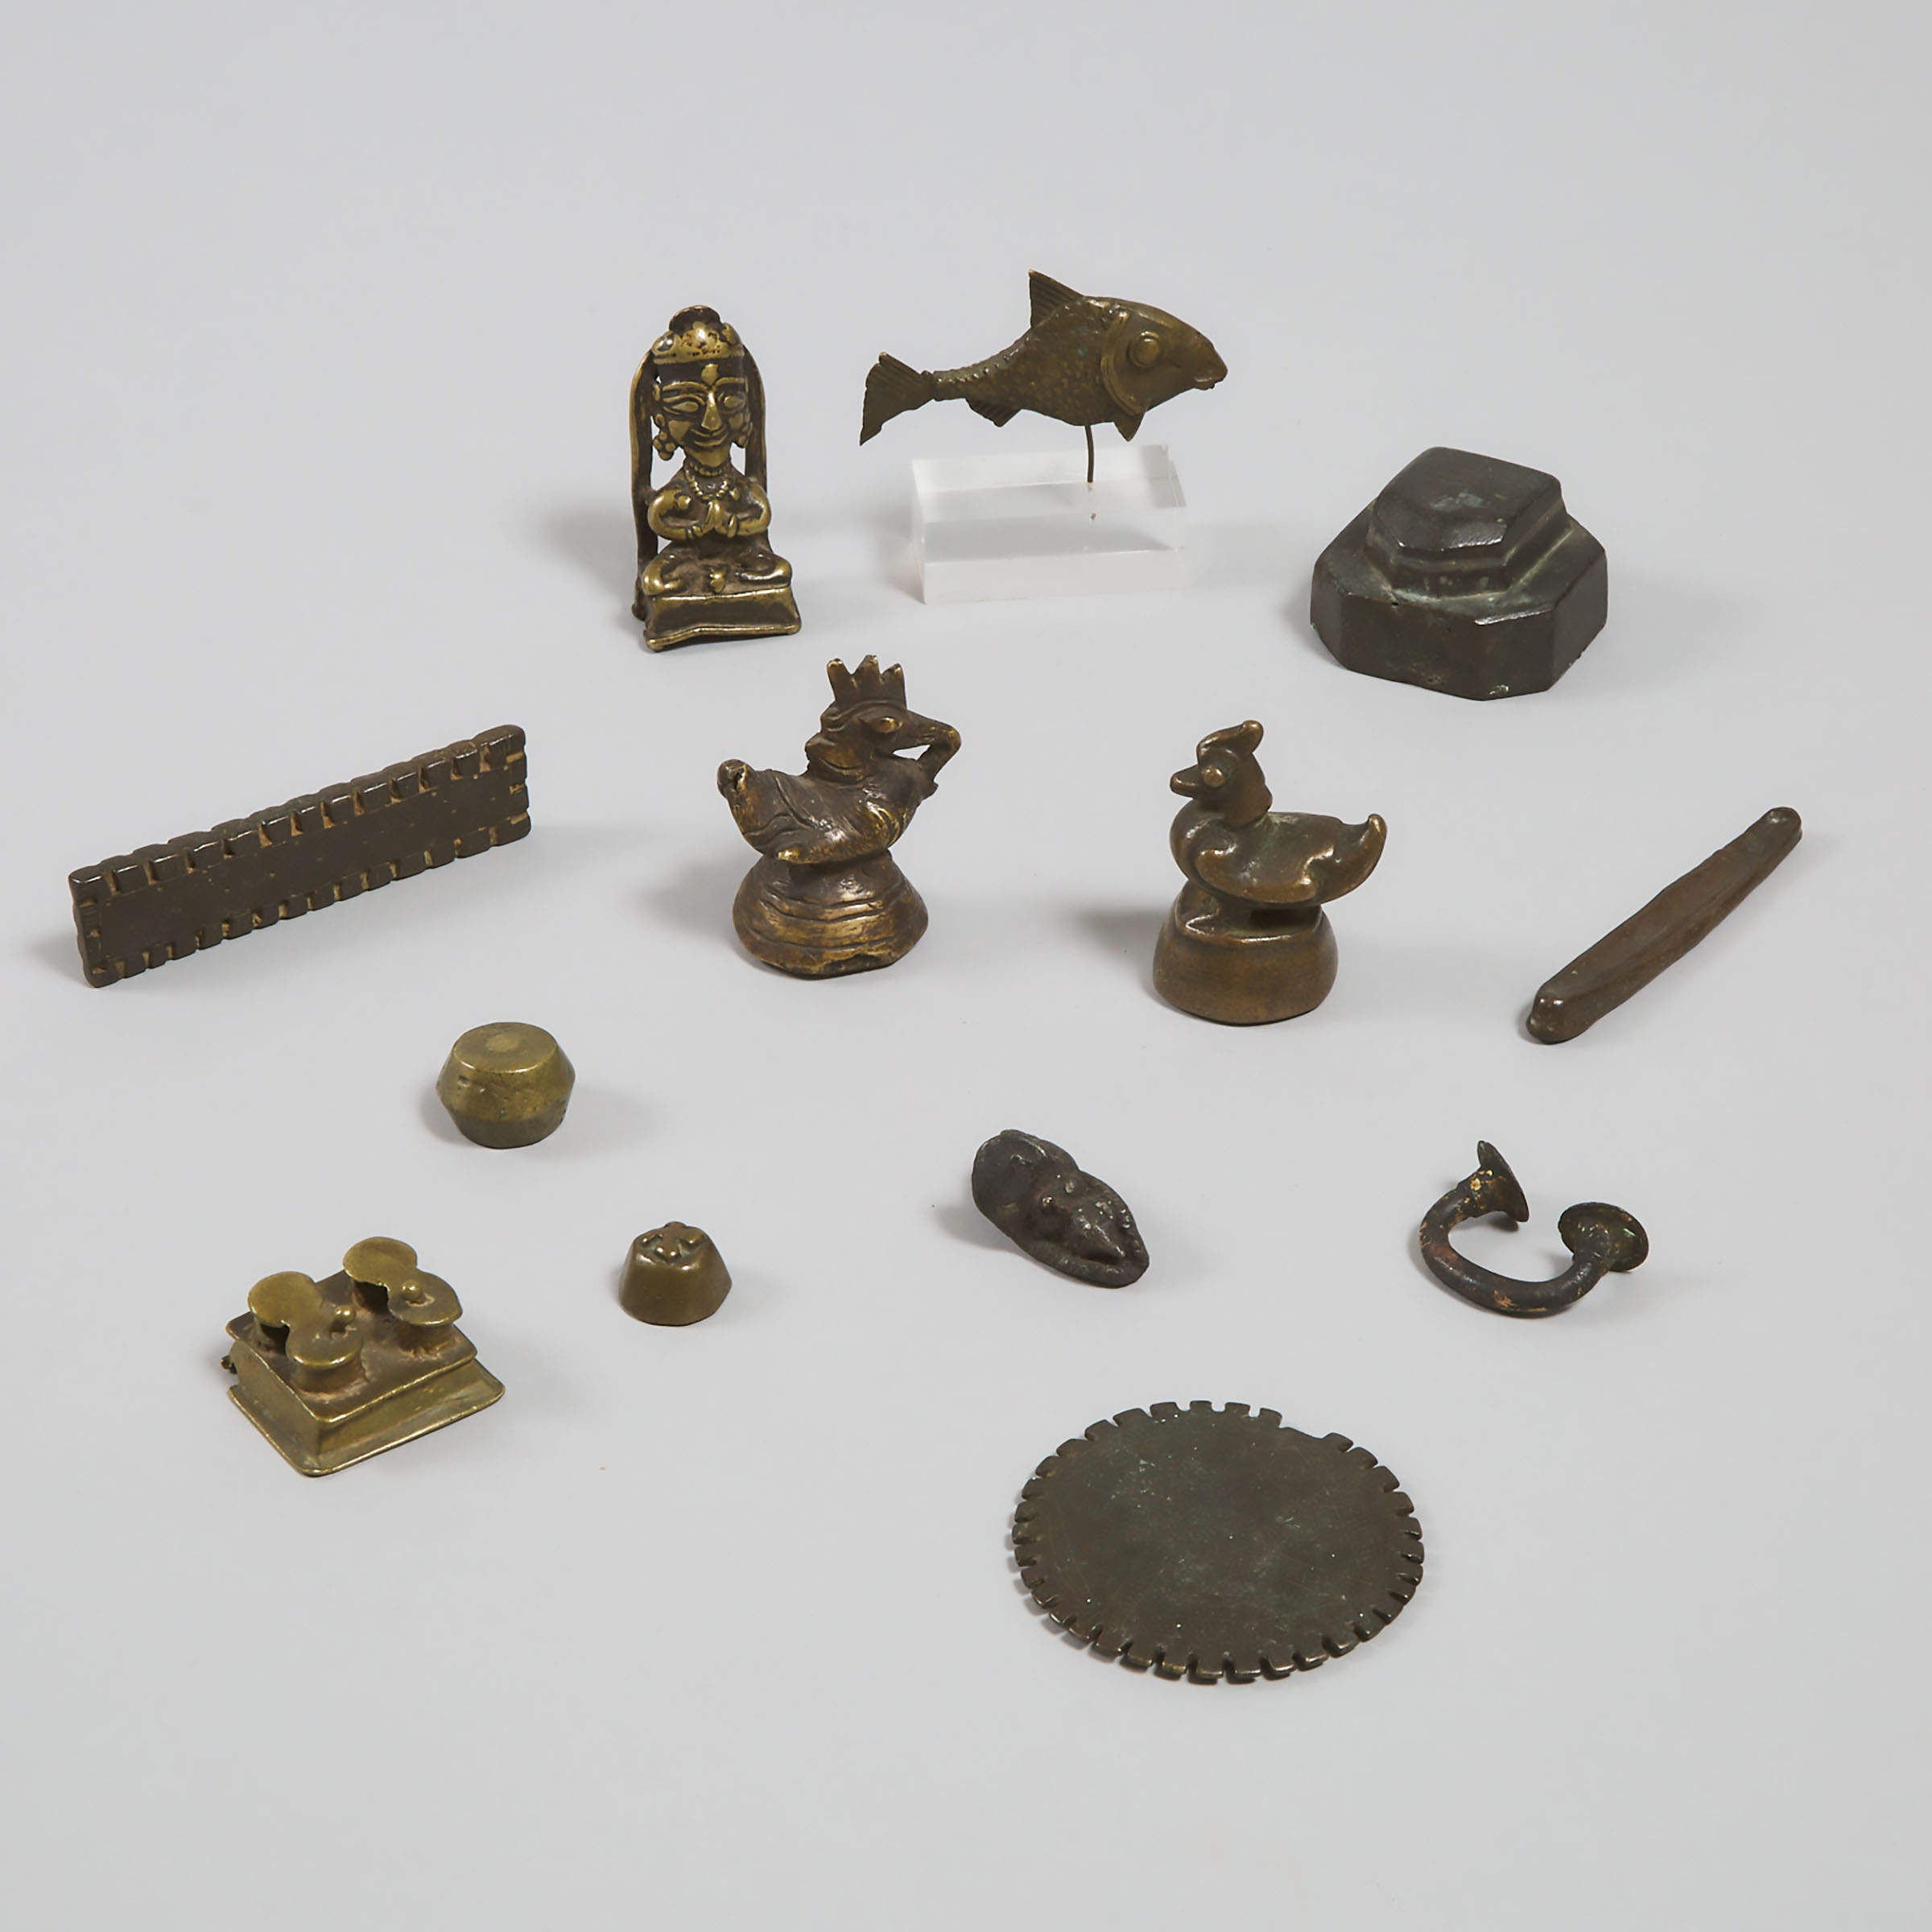 11 Mostly Ashanti Bronze Gold Weights, a West African Gilt Bronze Manilla, and a Laos 'Boat Money' Bronze Ingot, 19th/early 20th century